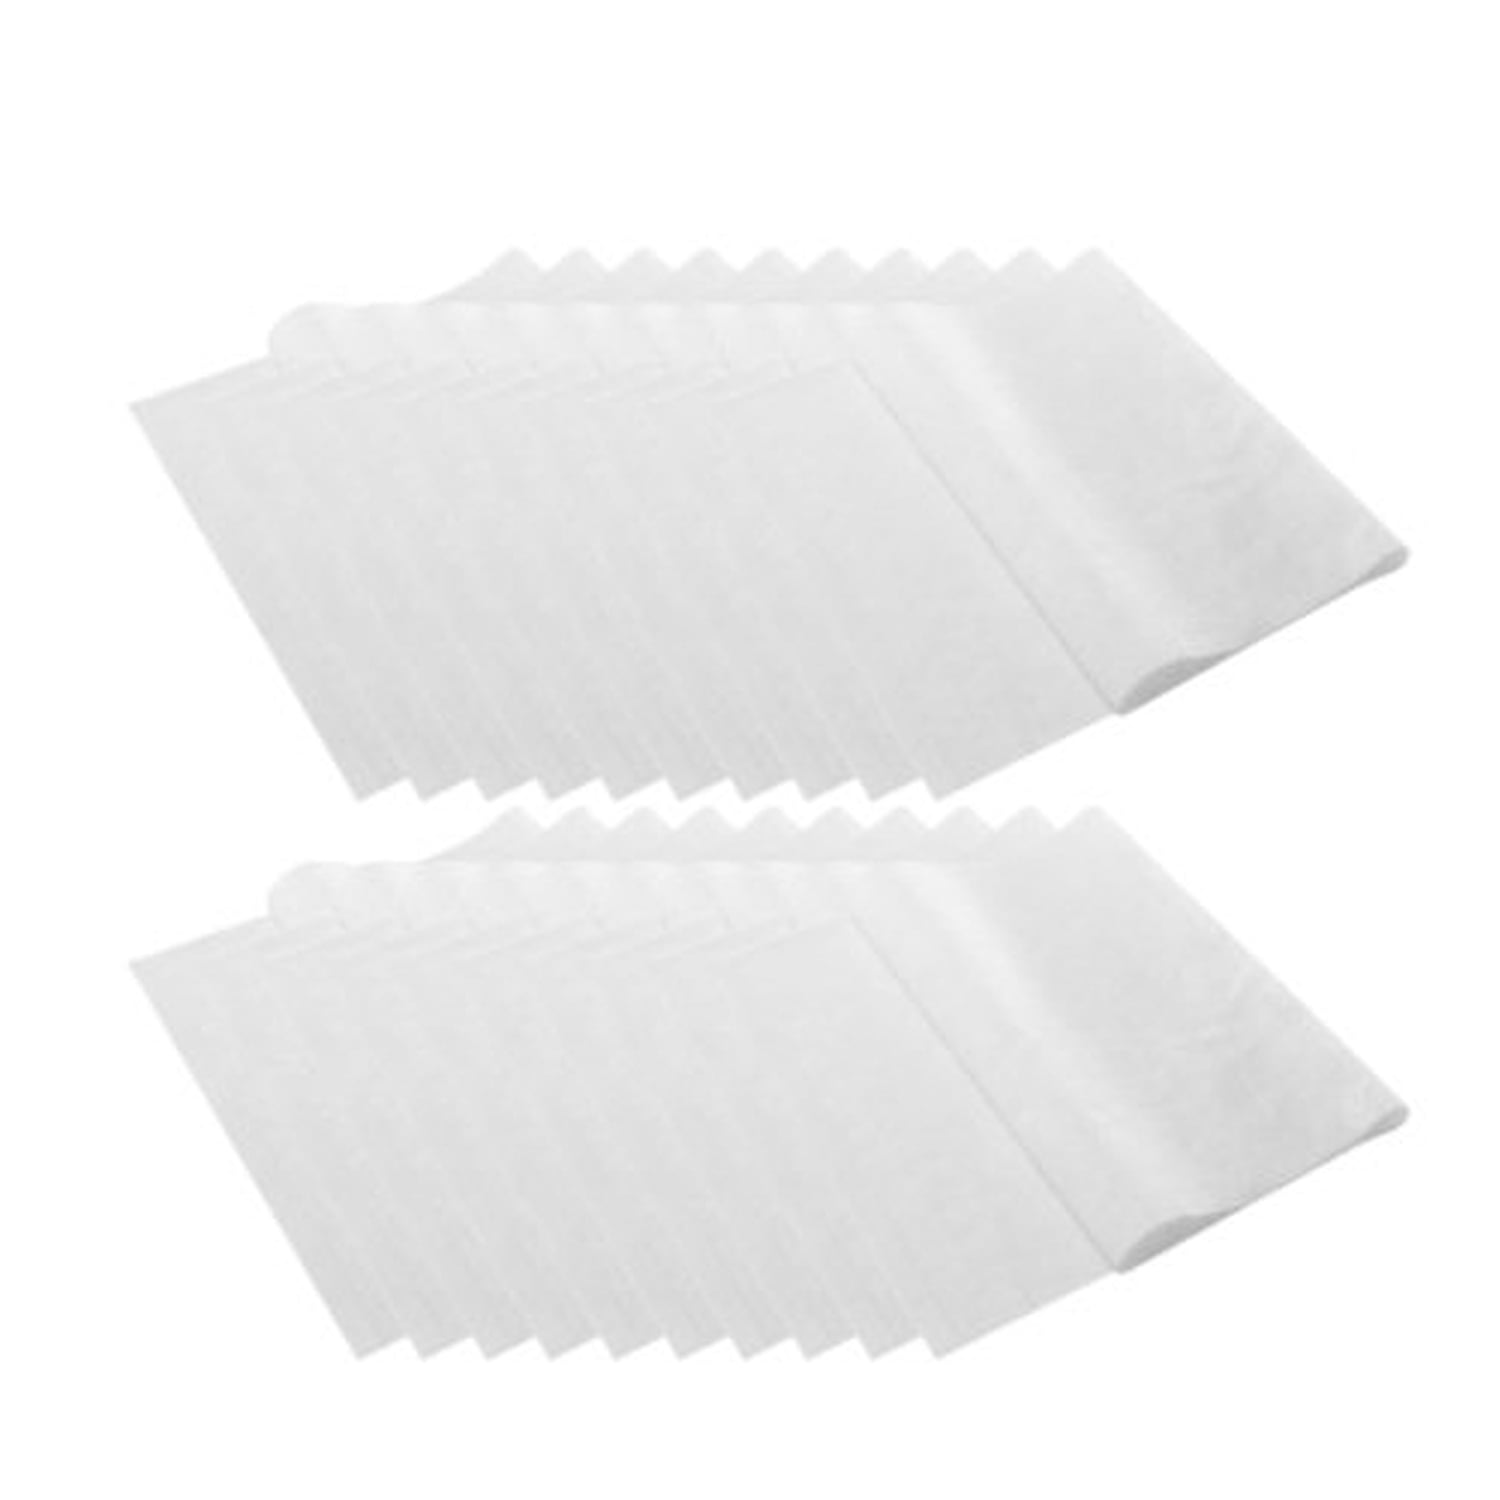 10 Sheet 28 x 12 Electrostatic Filter Cotton HEPA Filtering Net Compatible with Philips Xiaomi Mi Air Purifier HIKSHAPER Electrostatic Filter Cotton